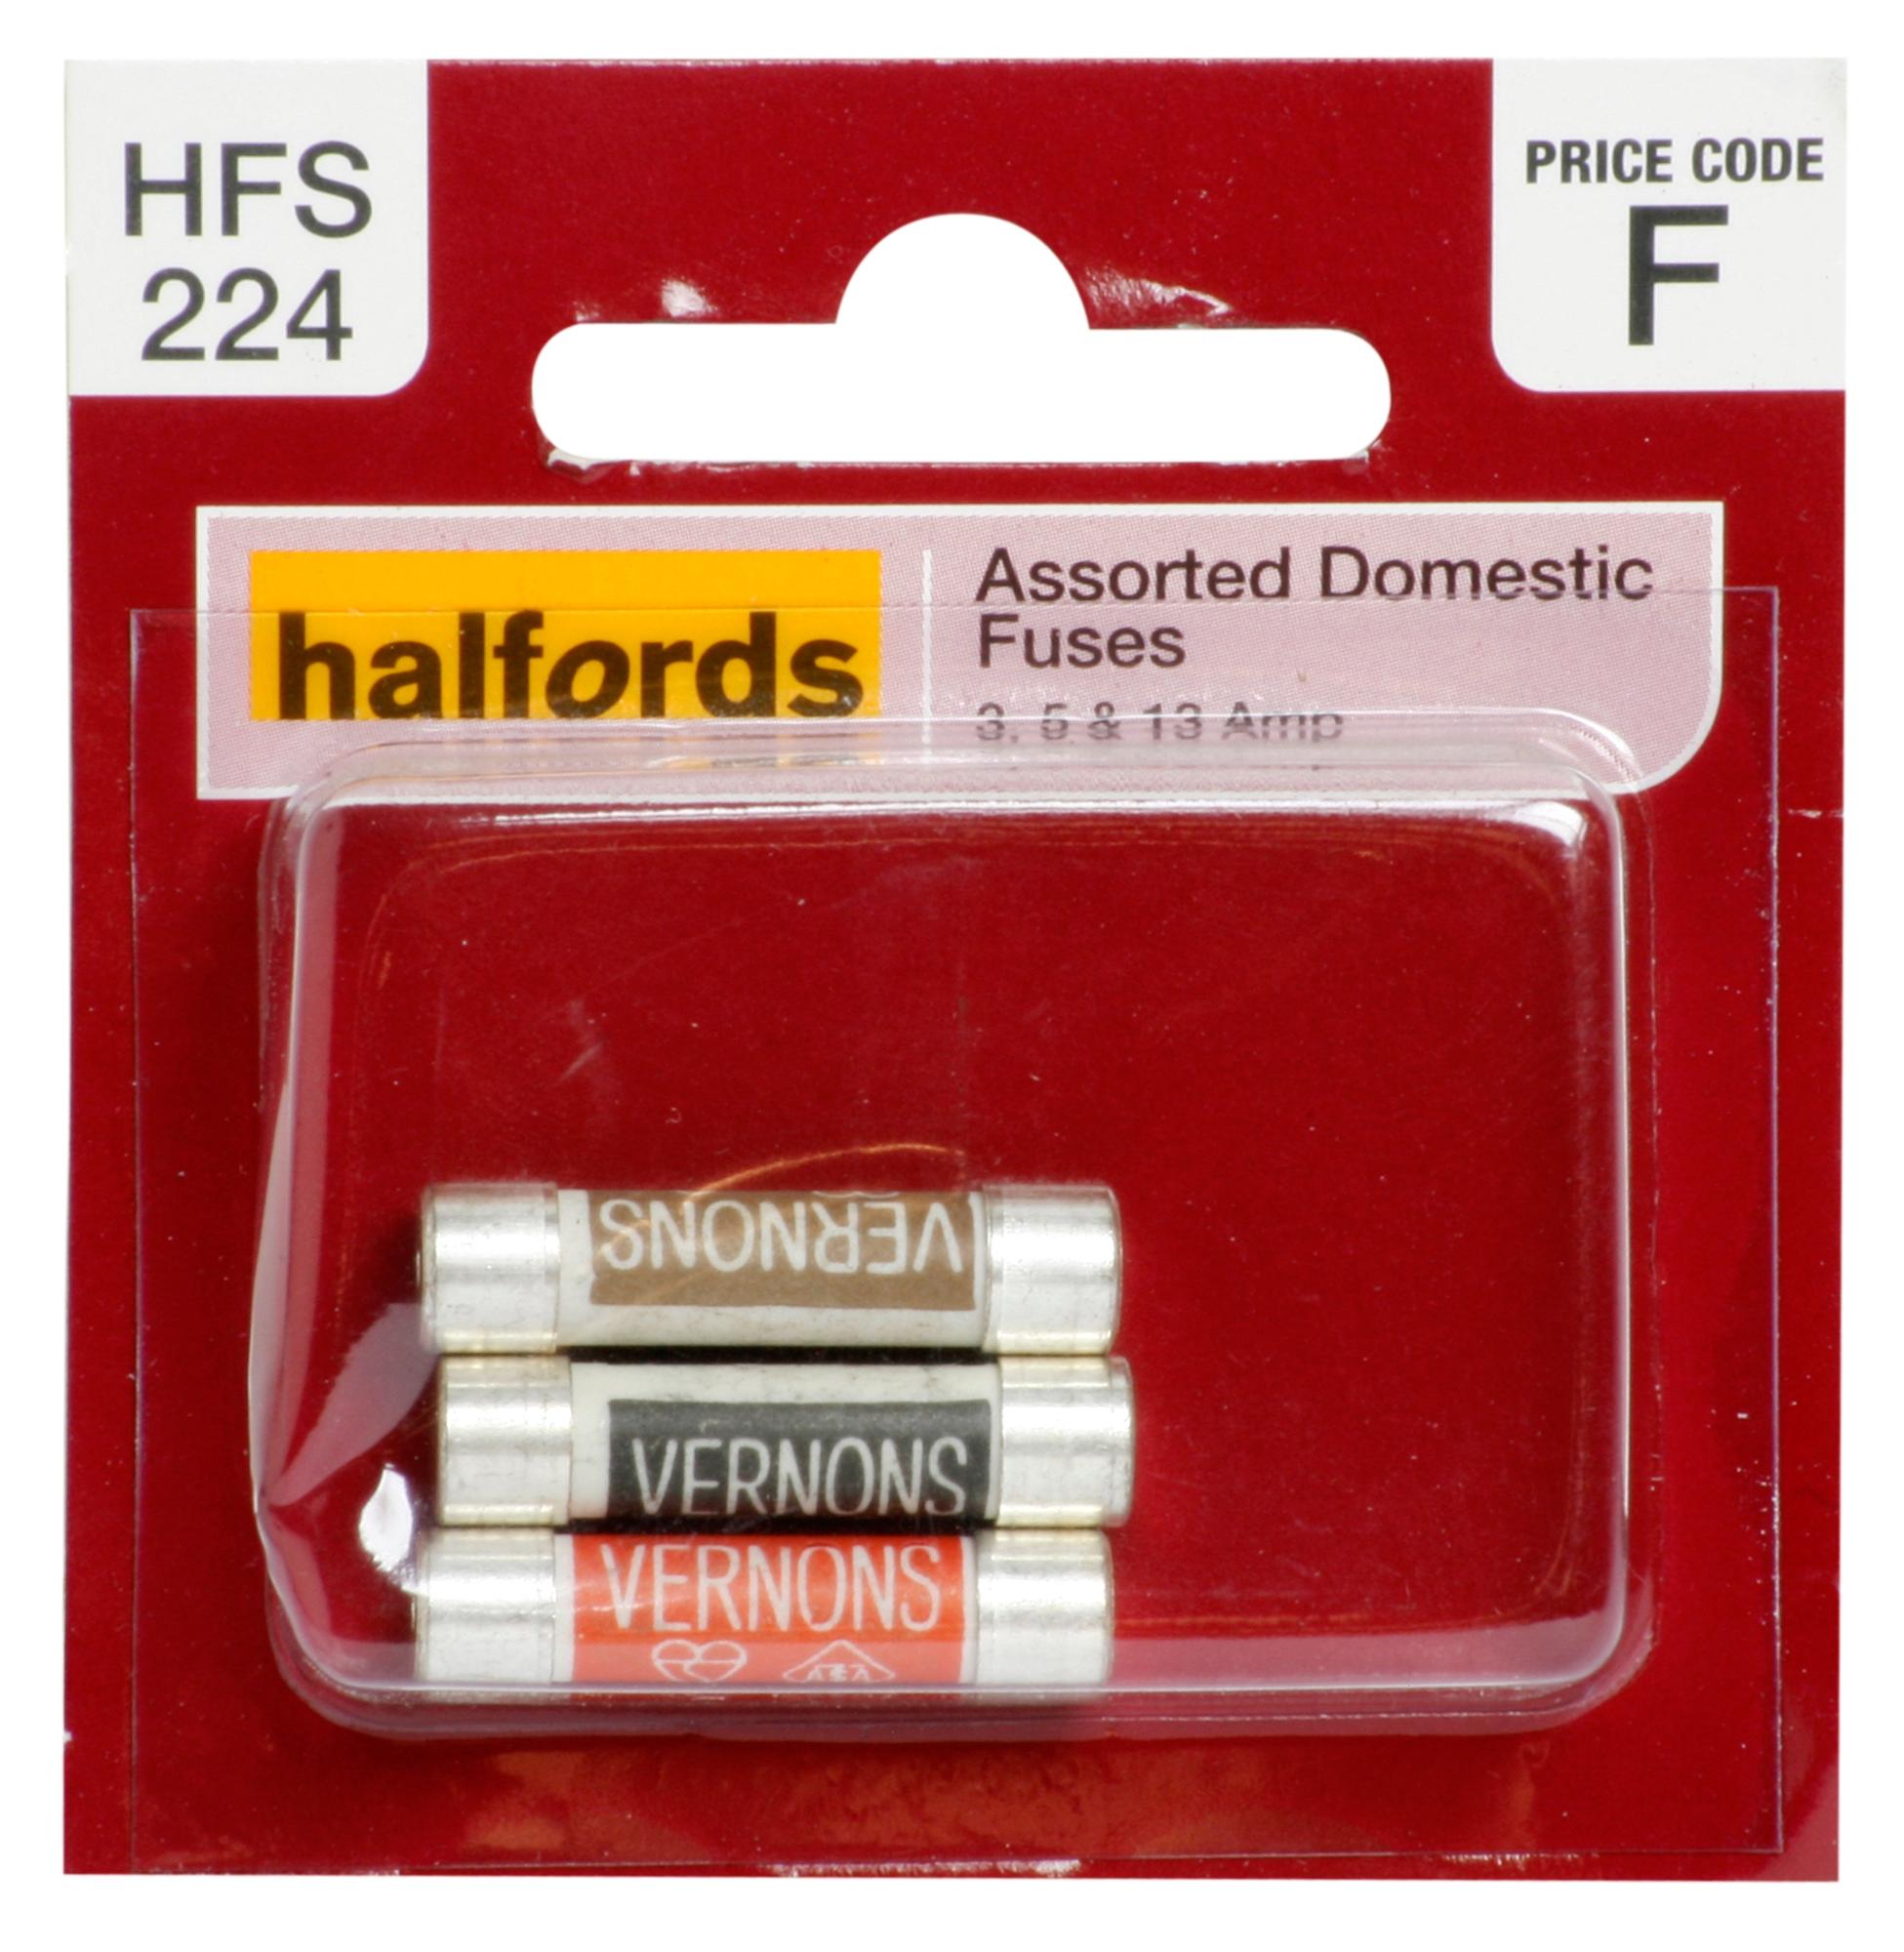 Halfords Assorted Domestic Fuses 3/5/13 Amp (Hfs224)